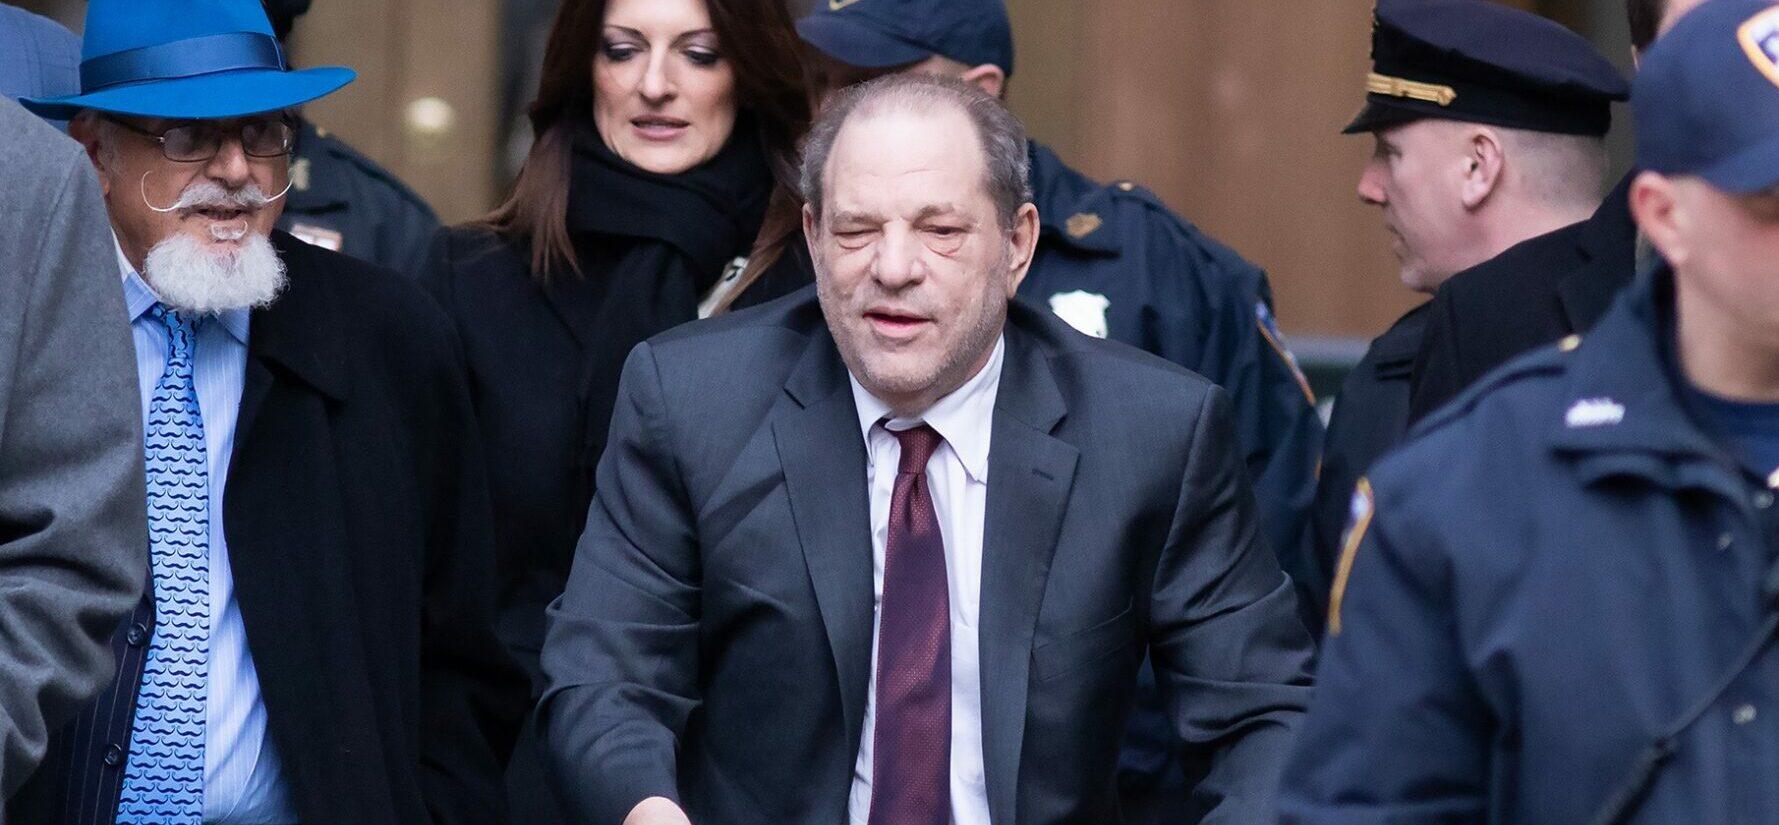 Harvey Weinstein’s Net Worth, From $300M To $25M, Faces Further Decline With Retrial Looming